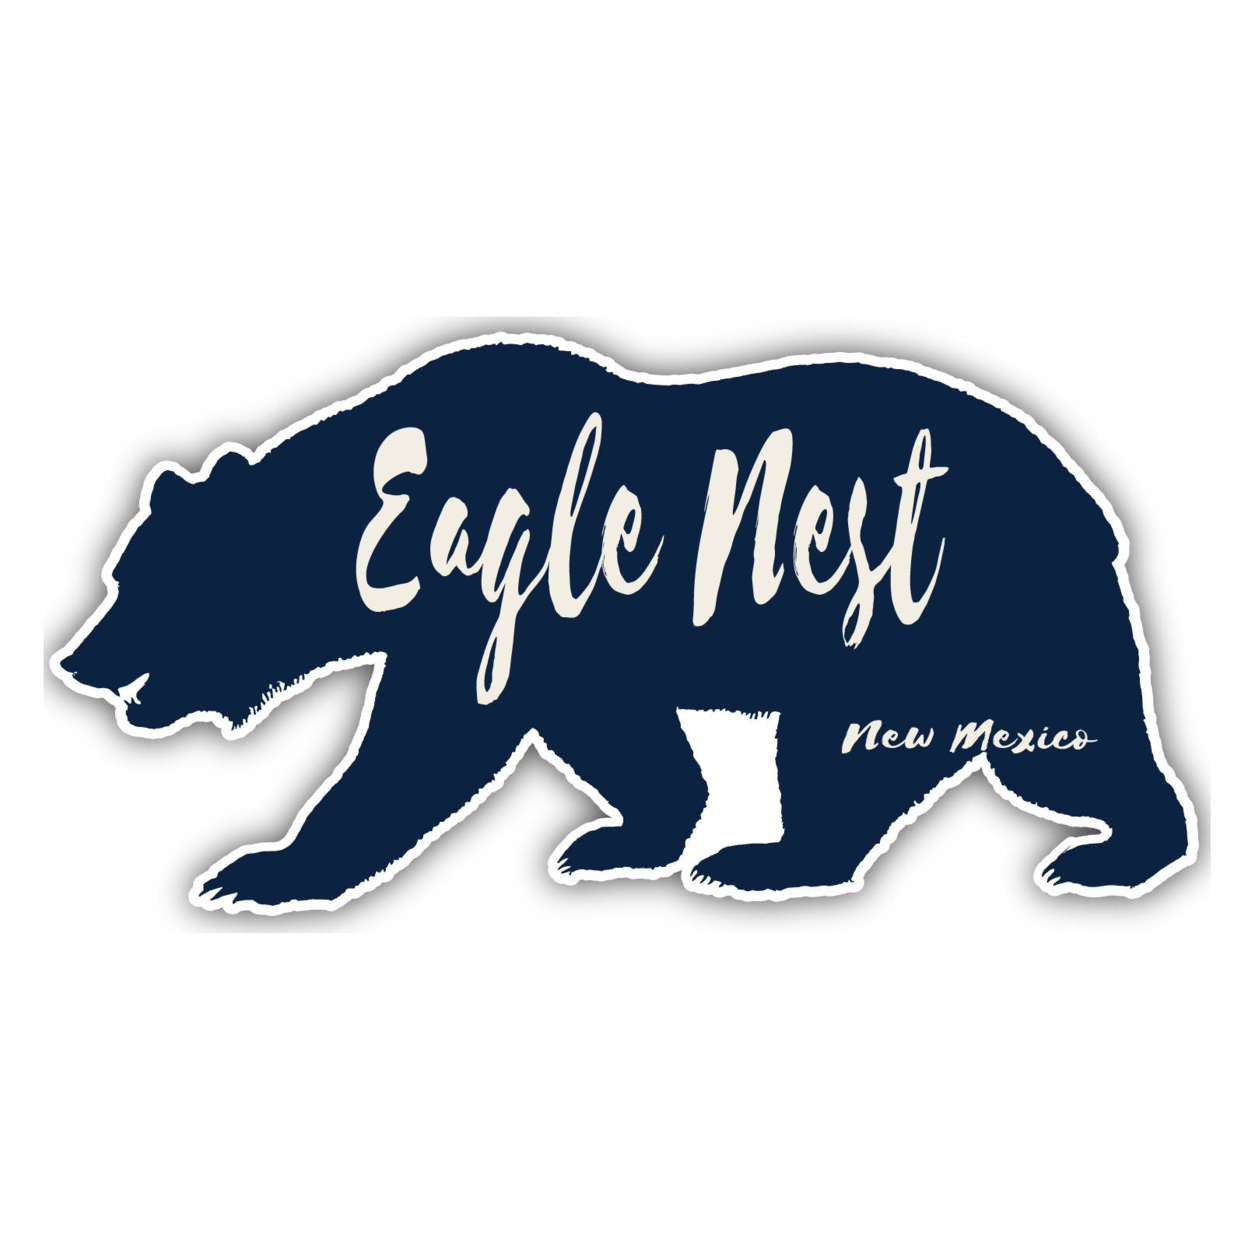 Eagle Nest New Mexico Souvenir Decorative Stickers (Choose Theme And Size) - Single Unit, 4-Inch, Great Outdoors